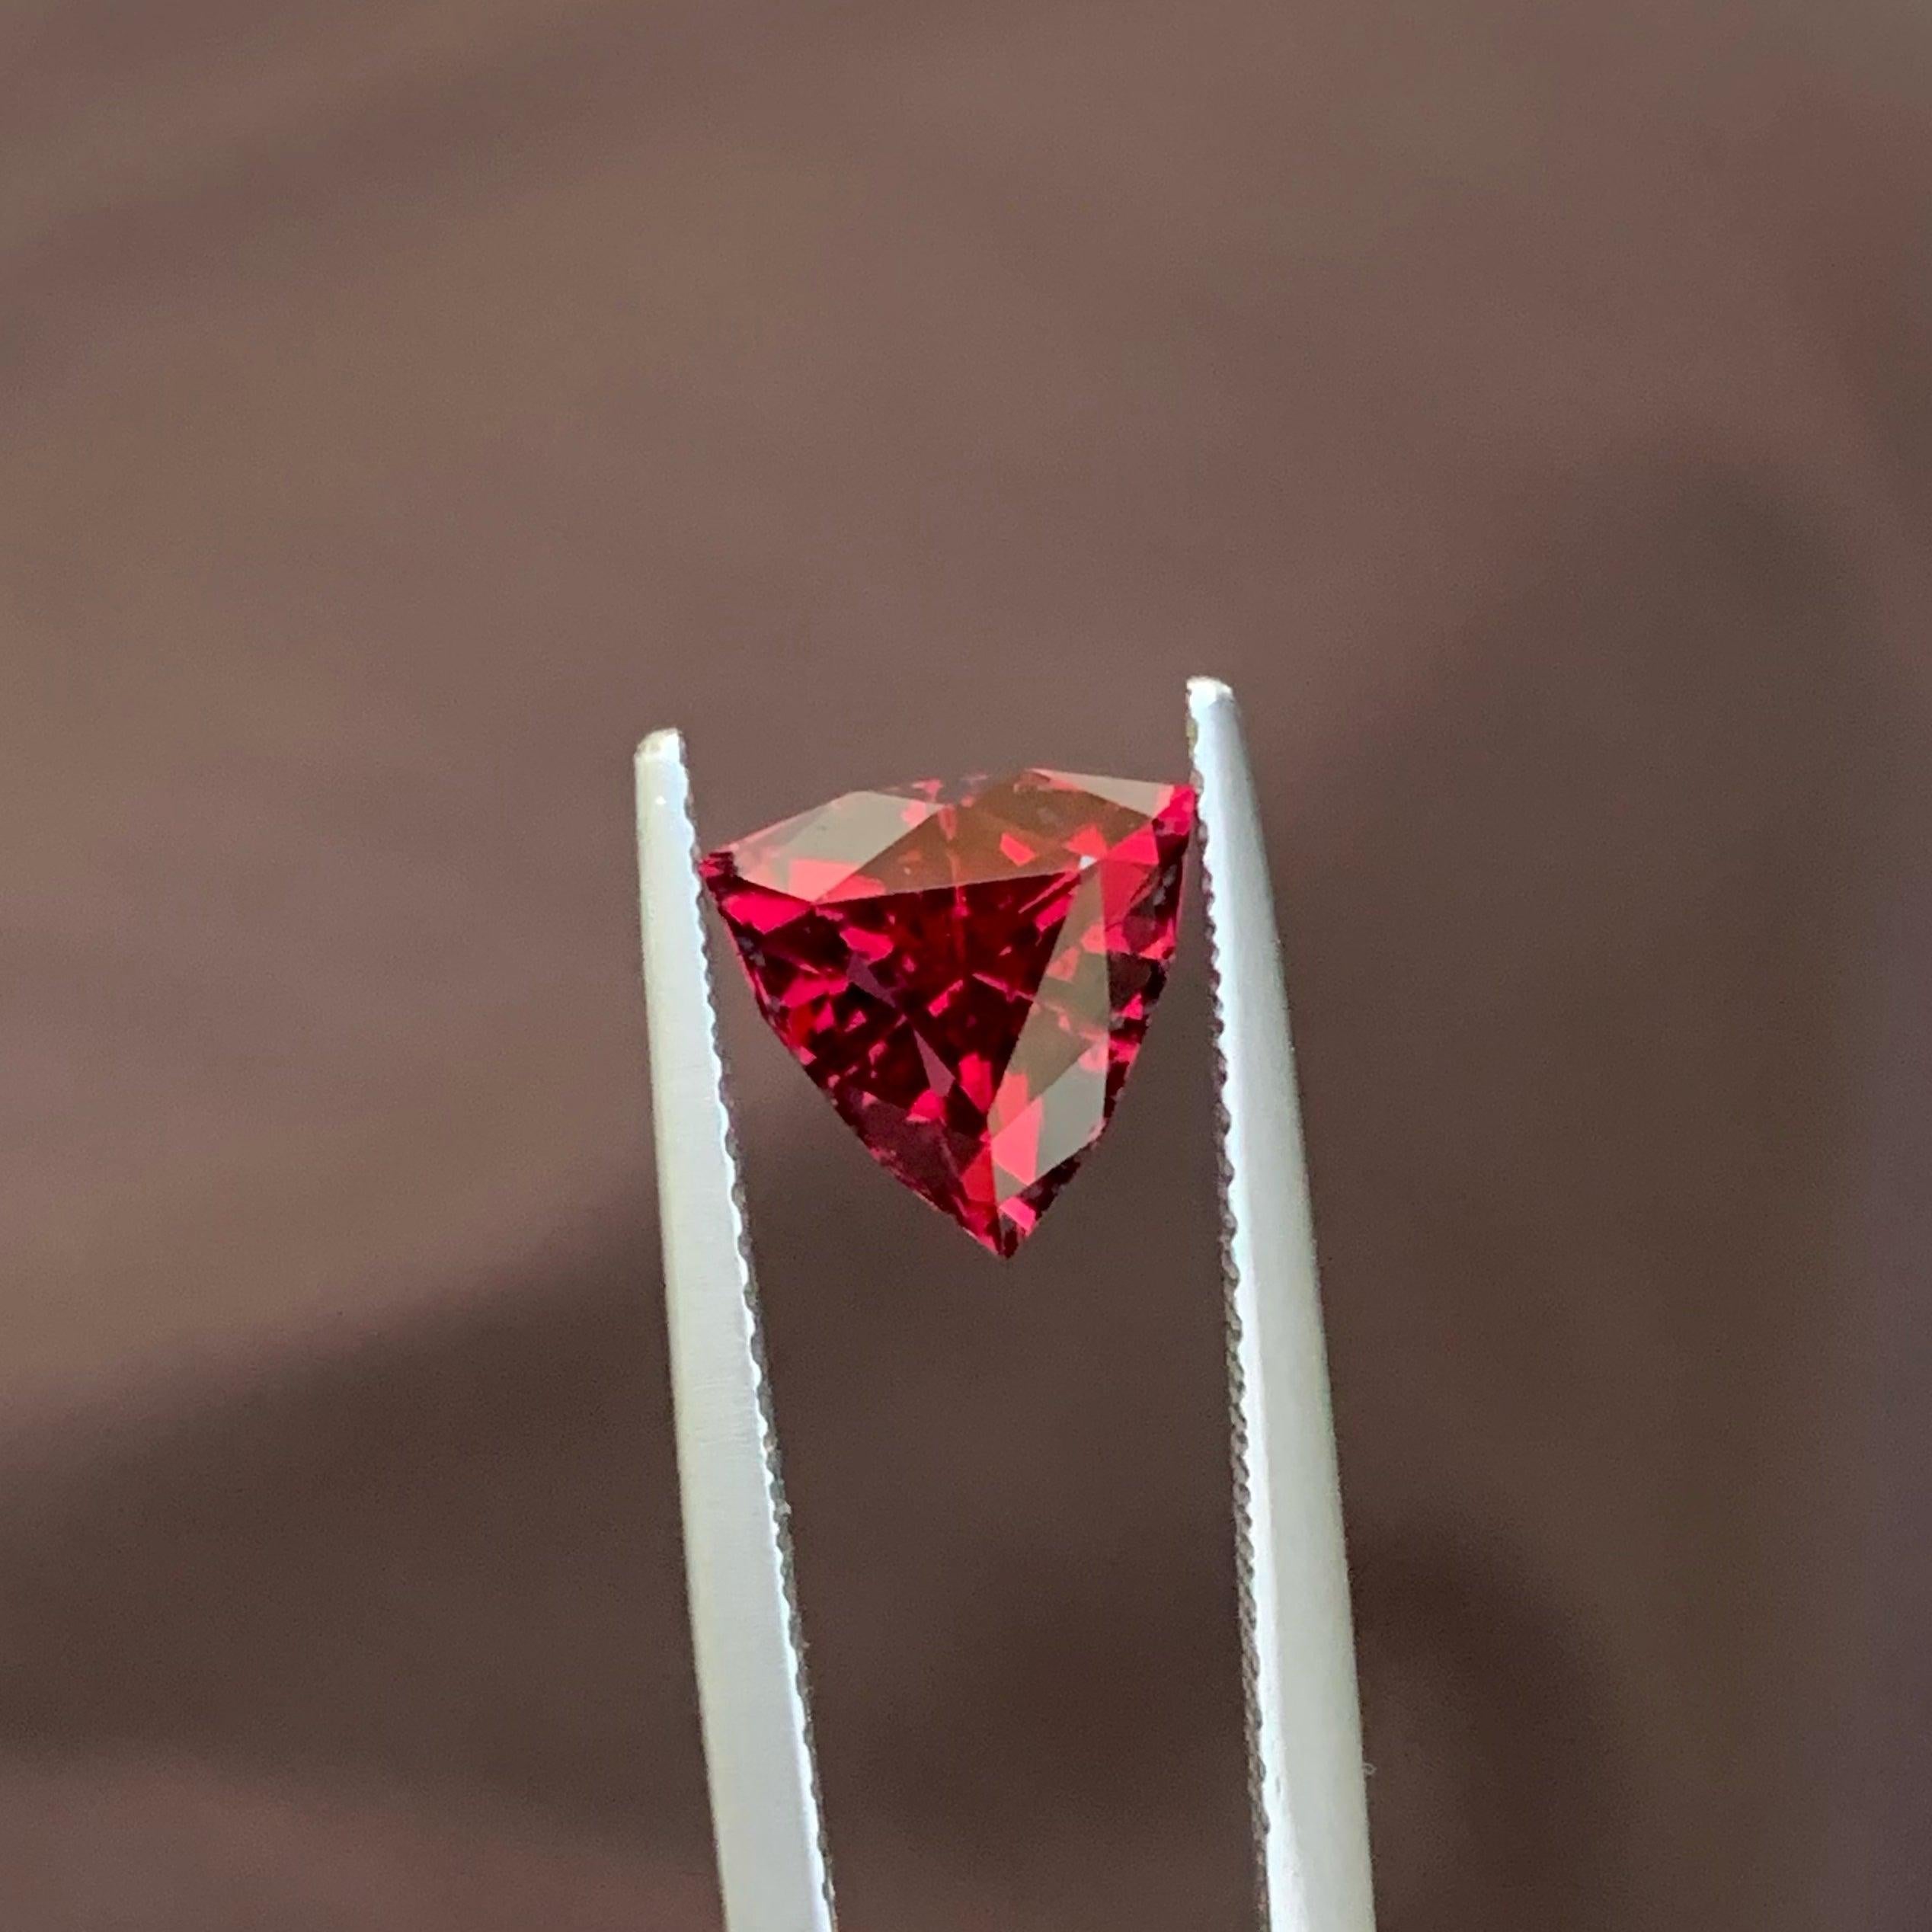 Stunning Red Loose Garnet Gemstone, available for sale at wholesale price natural high quality, 2.20 carats certified garnet gemstone from Malawi.

Product Information:
GEMSTONE TYPE:	Stunning Red Loose Garnet Gemstone
WEIGHT:	2.20